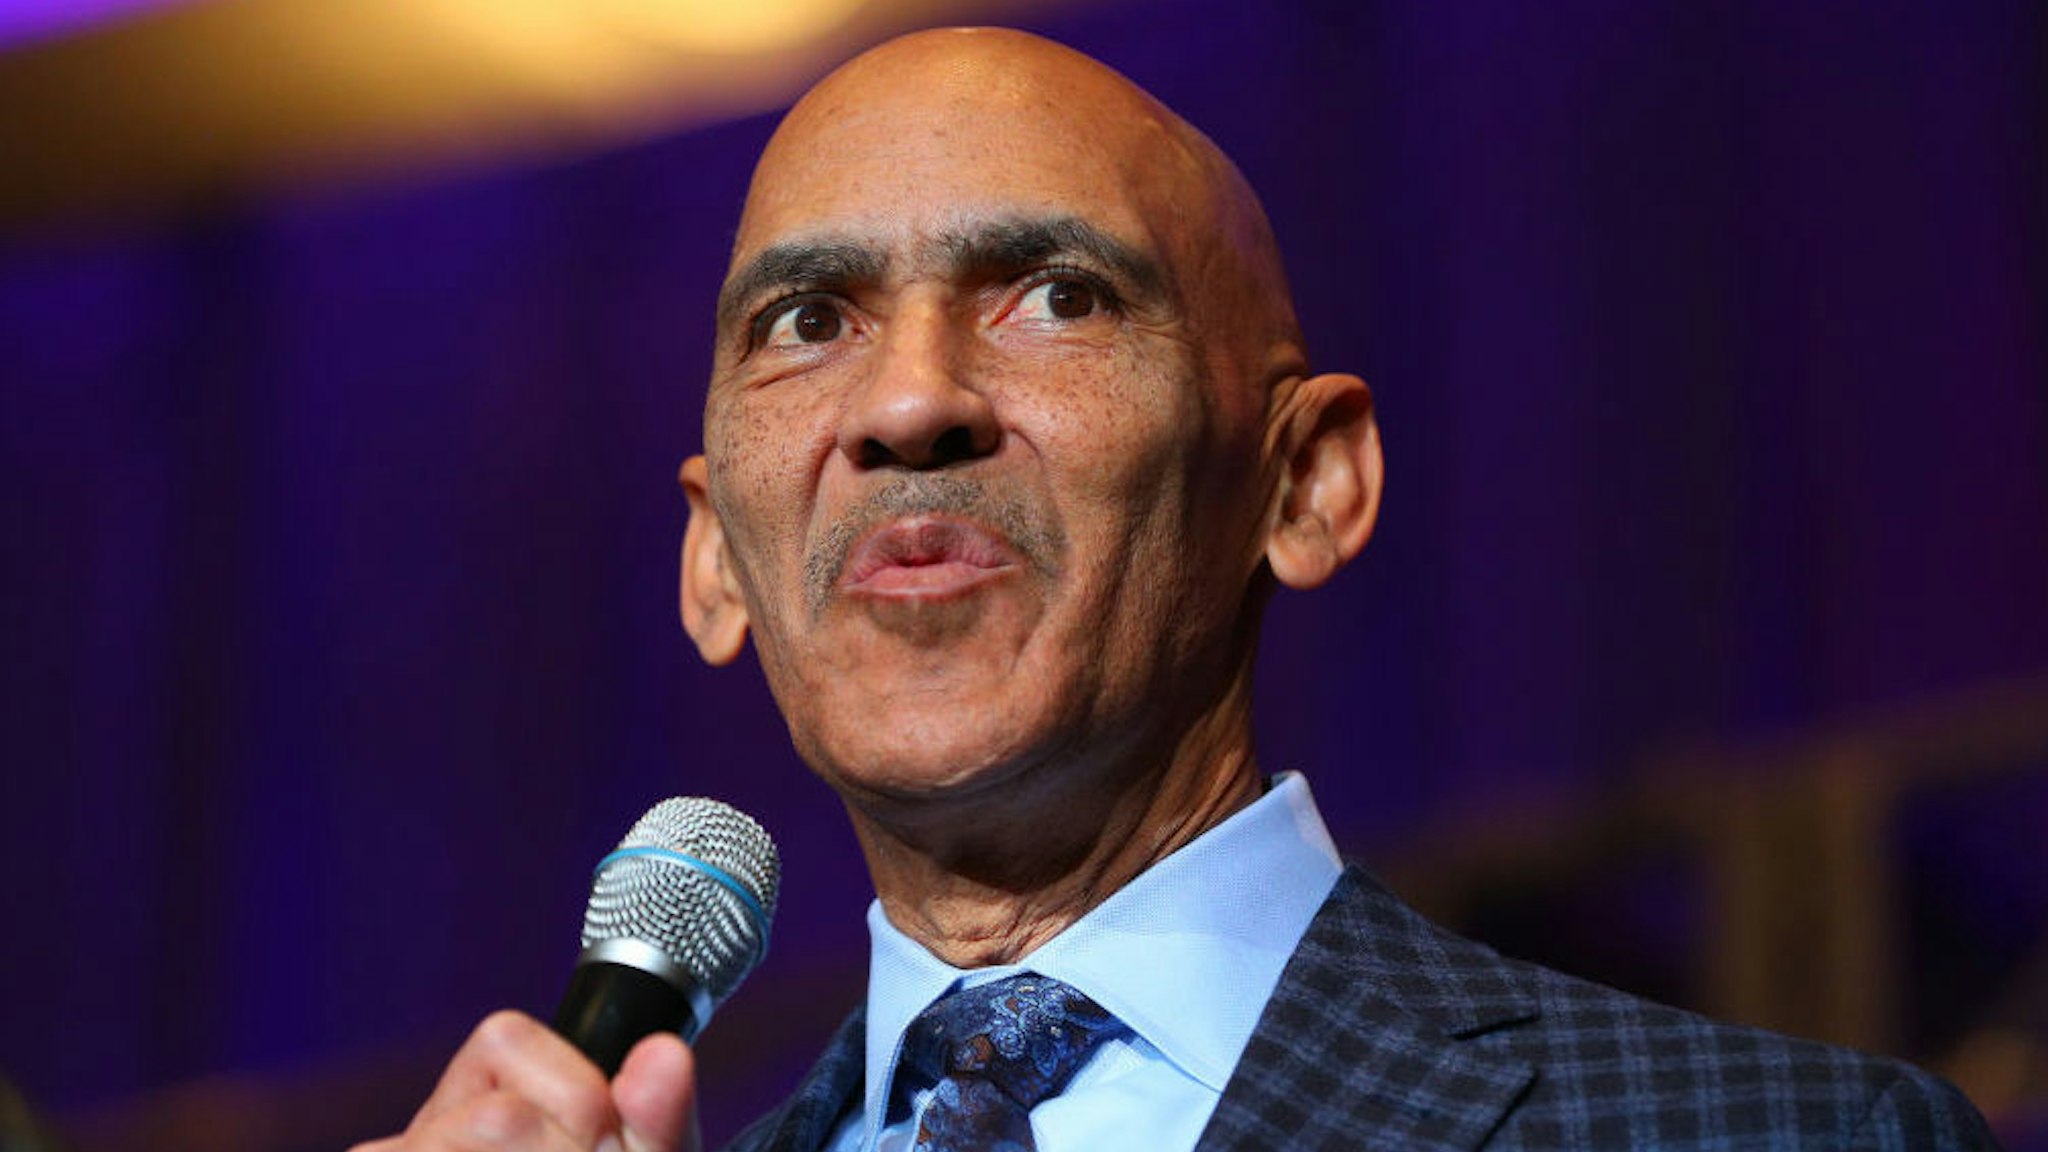 Tony Dungy speaks during the Bart Starr Award during Super Bowl LII week on February 3, 2018, at the Hilton, in Minneapolis, MN.